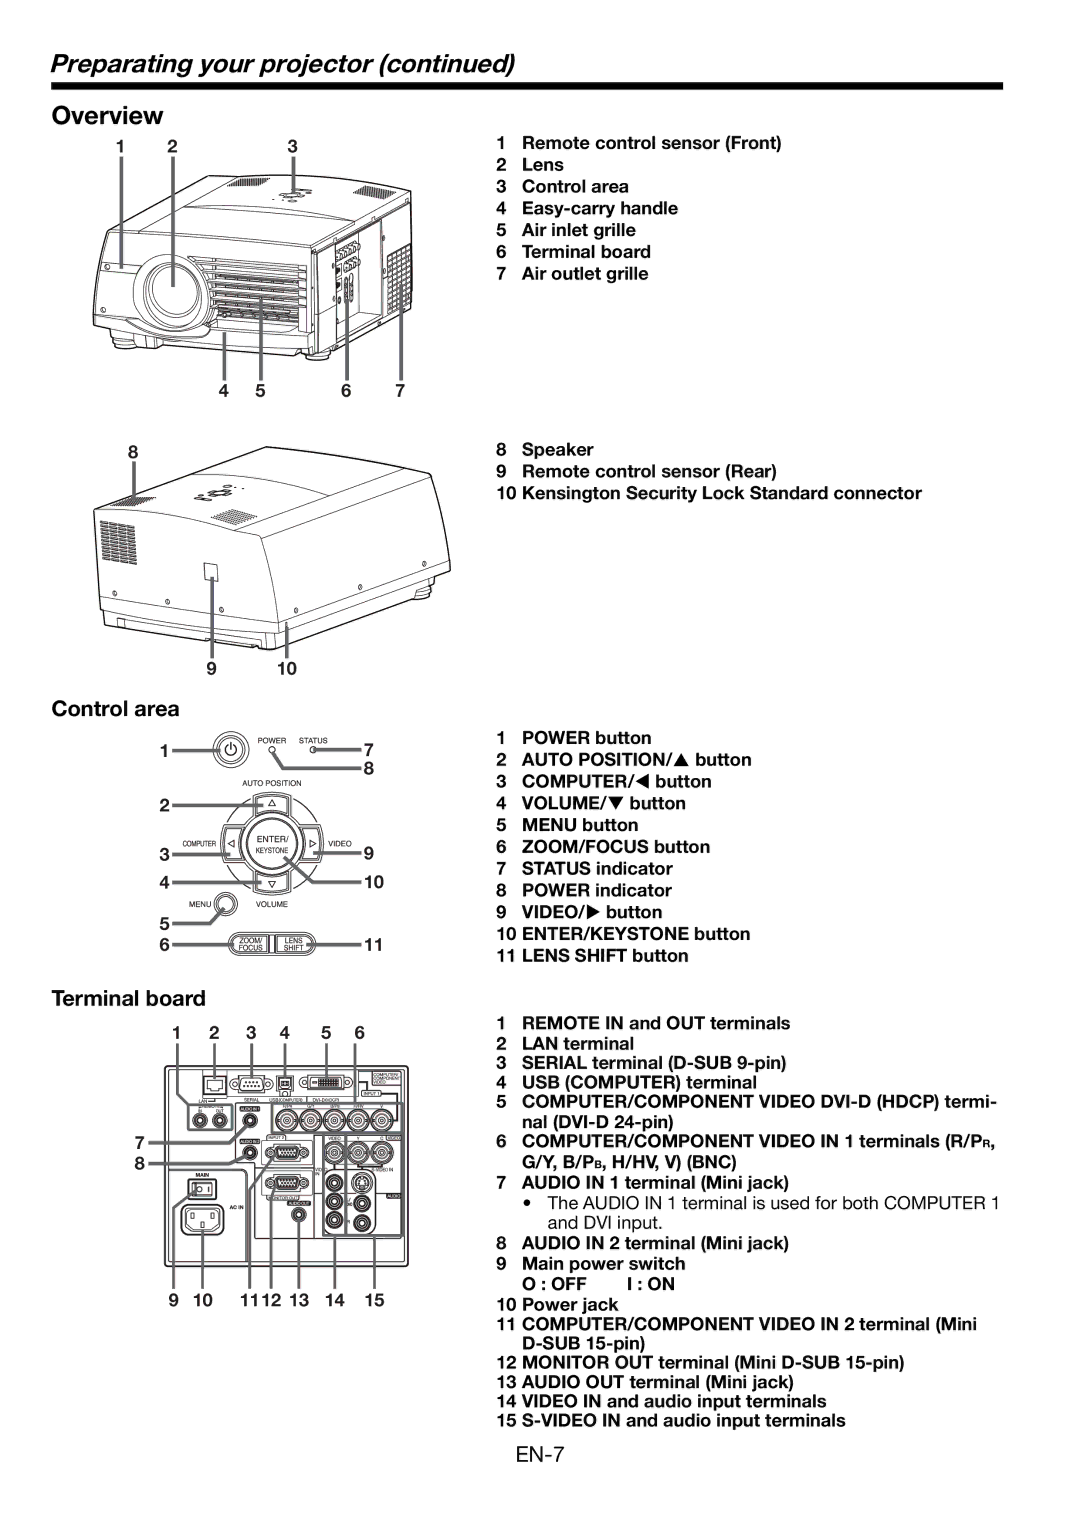 Mitsubishi Electronics FL7000 user manual Preparating your projector, Overview, Control area Terminal board 